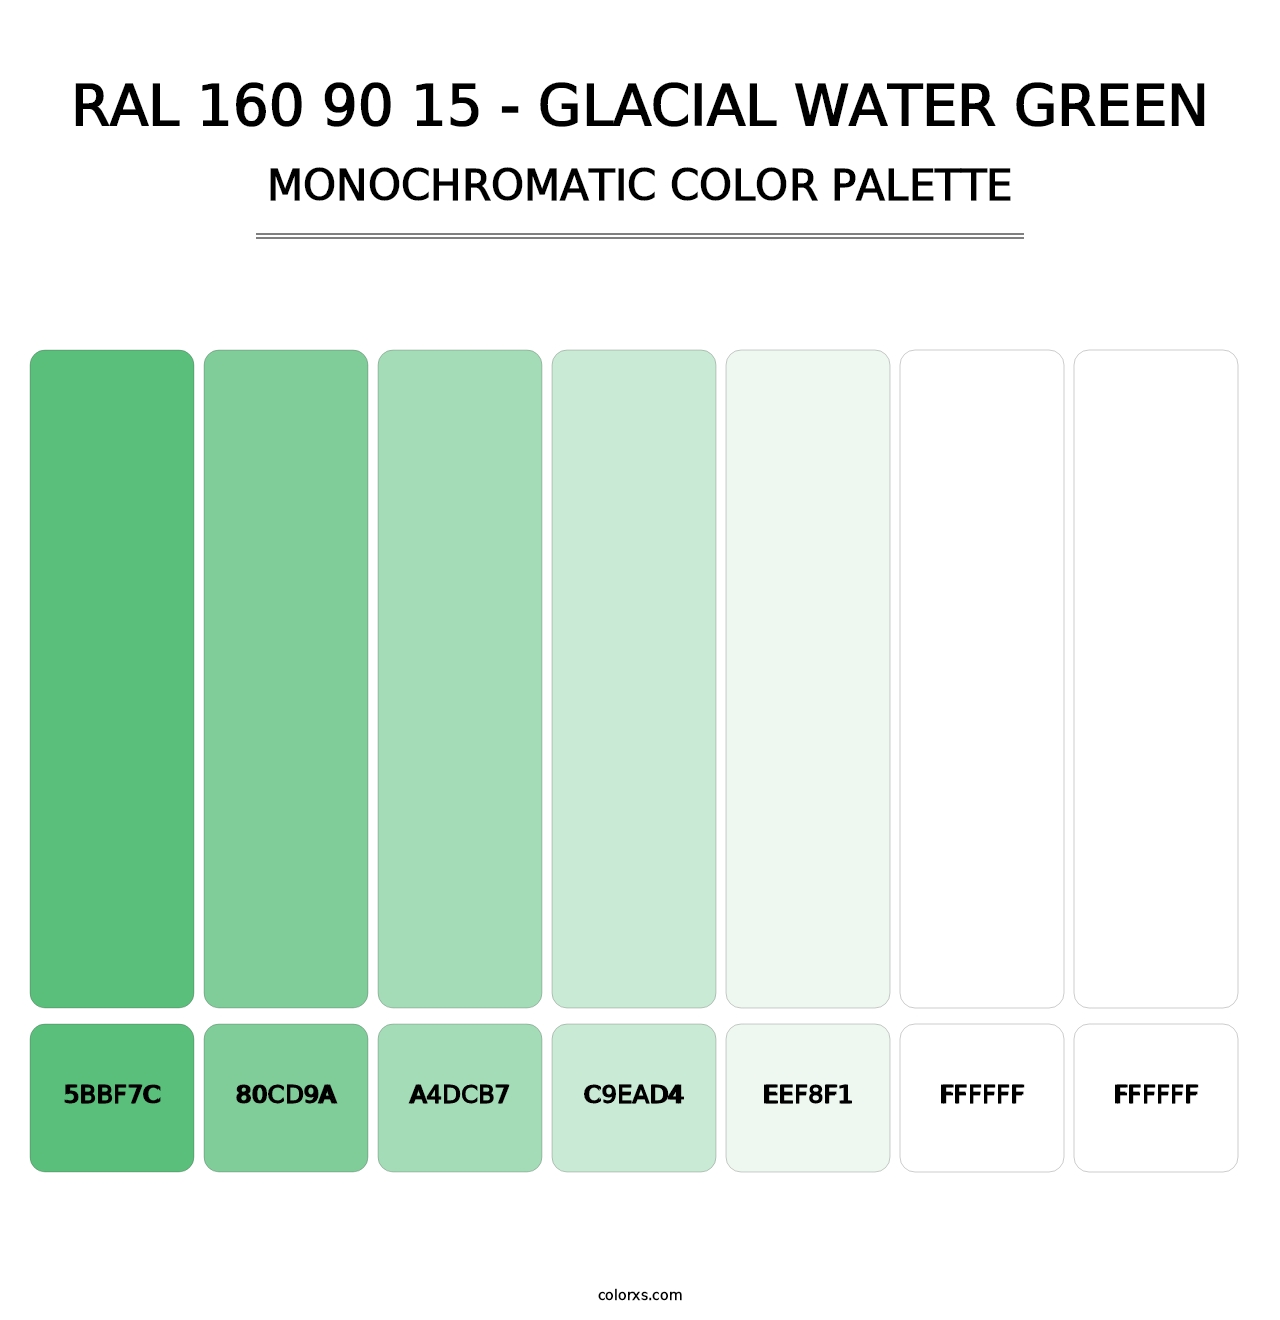 RAL 160 90 15 - Glacial Water Green - Monochromatic Color Palette